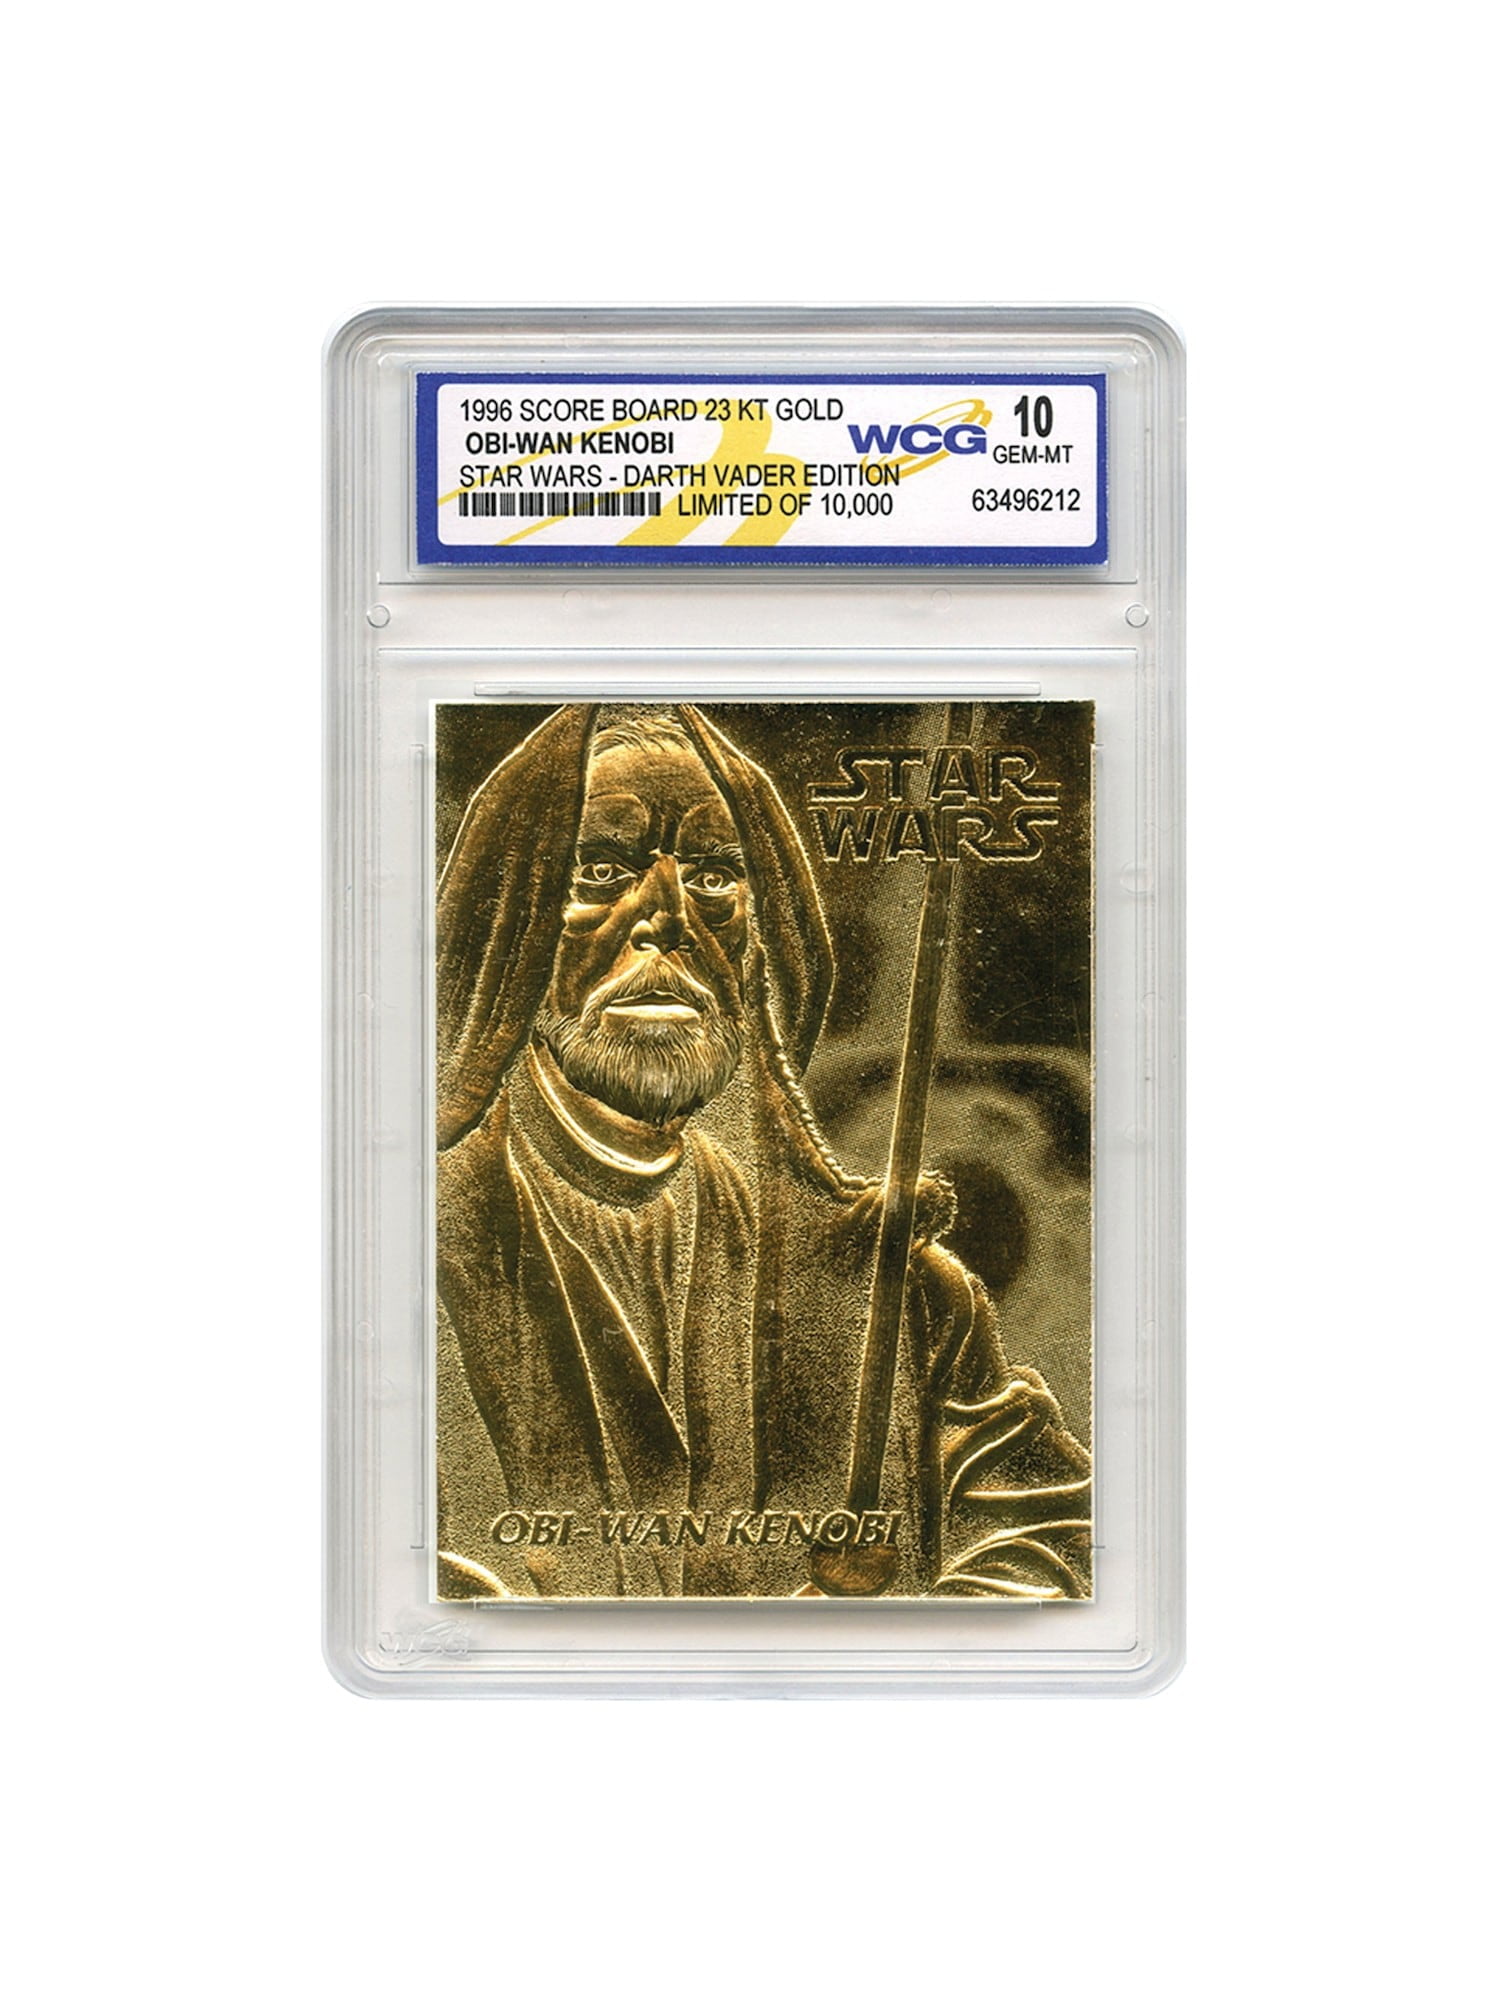 BOGO * Star Wars SHADOWS OF THE EMPIRE 23KT Gold Card Limited Edition #/10,000 